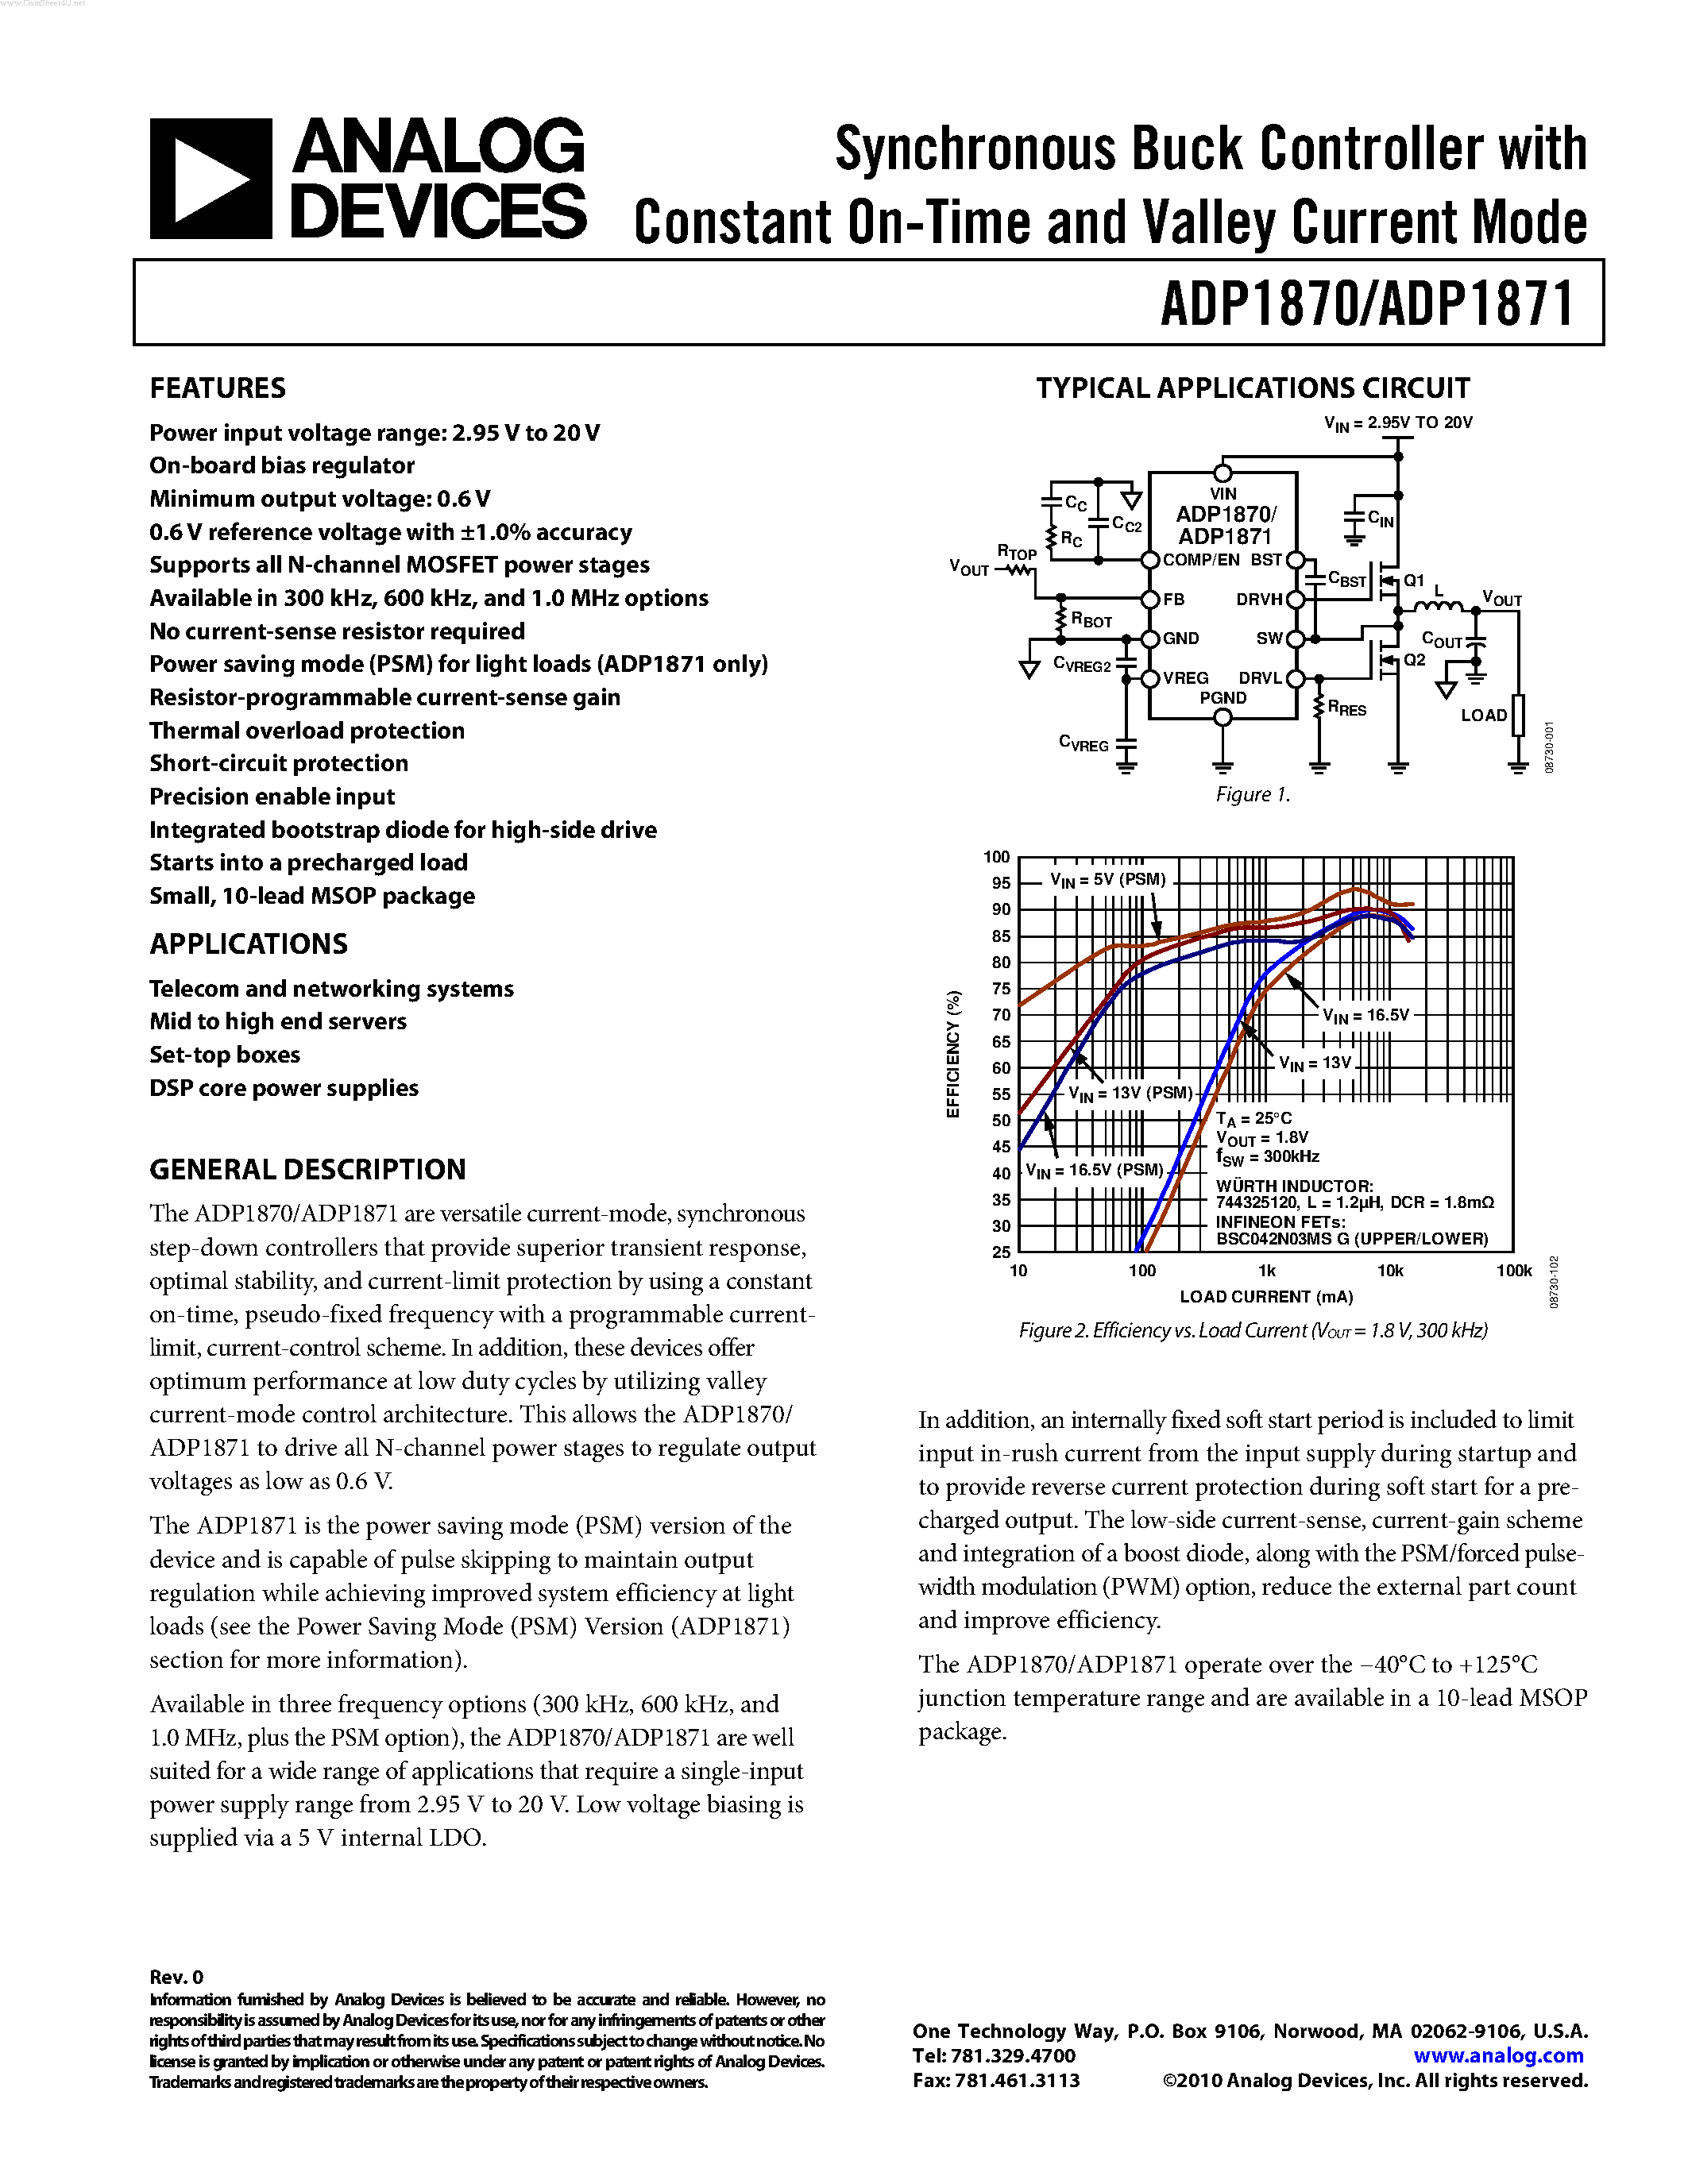 Datasheet ADP1870 - (ADP1870 / ADP1871) Synchronous Buck Controller page 1